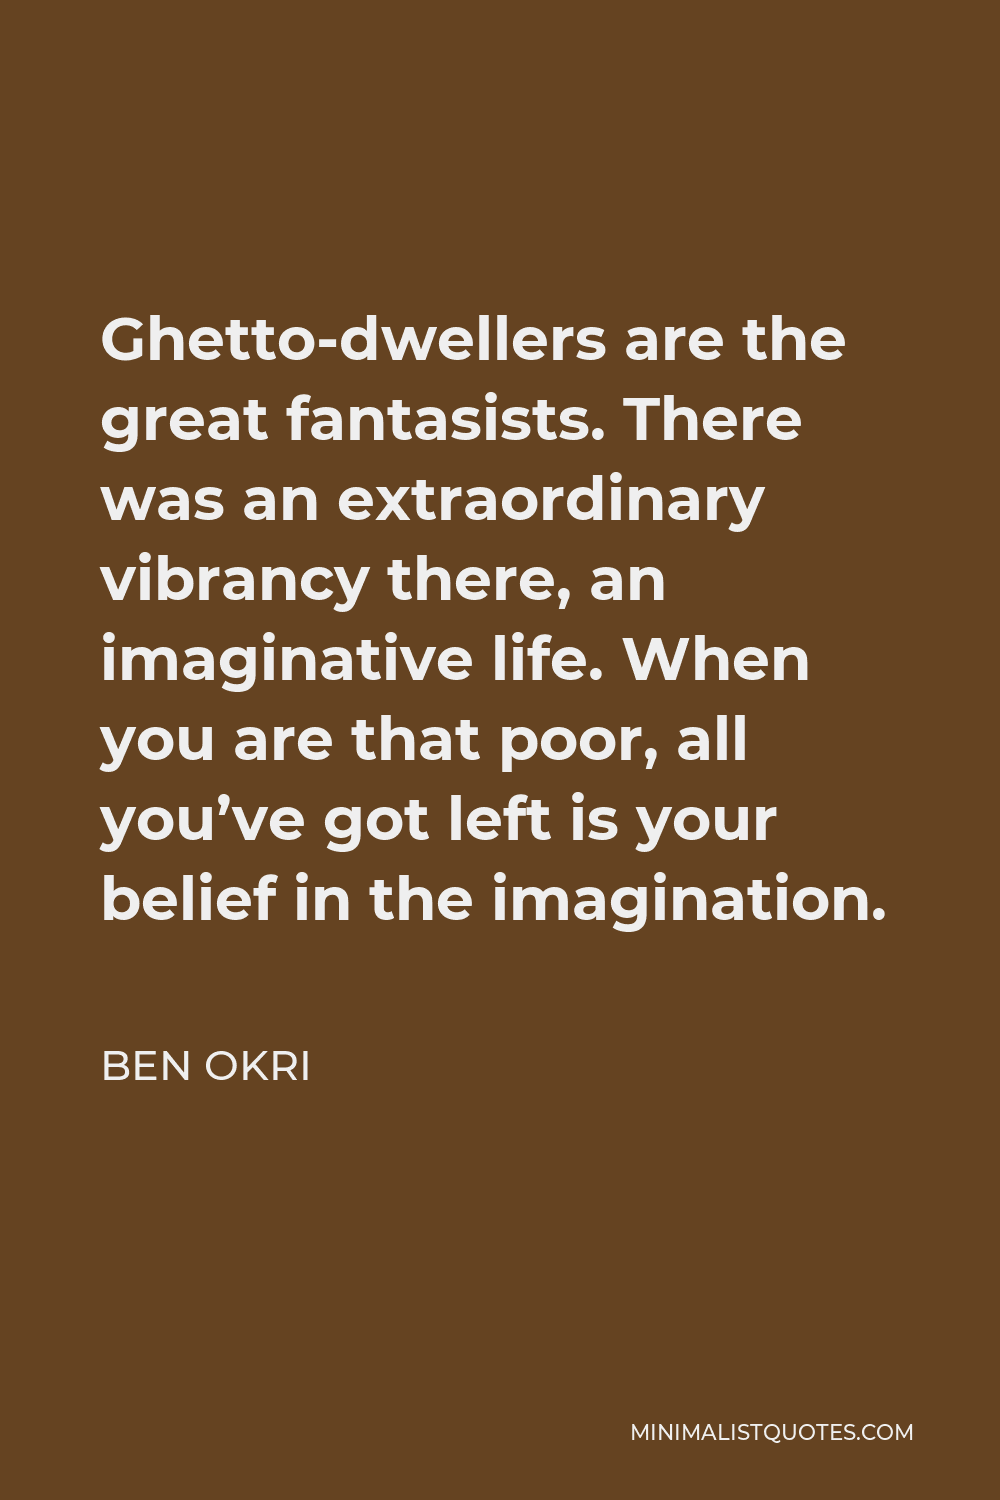 Ben Okri Quote - Ghetto-dwellers are the great fantasists. There was an extraordinary vibrancy there, an imaginative life. When you are that poor, all you’ve got left is your belief in the imagination.